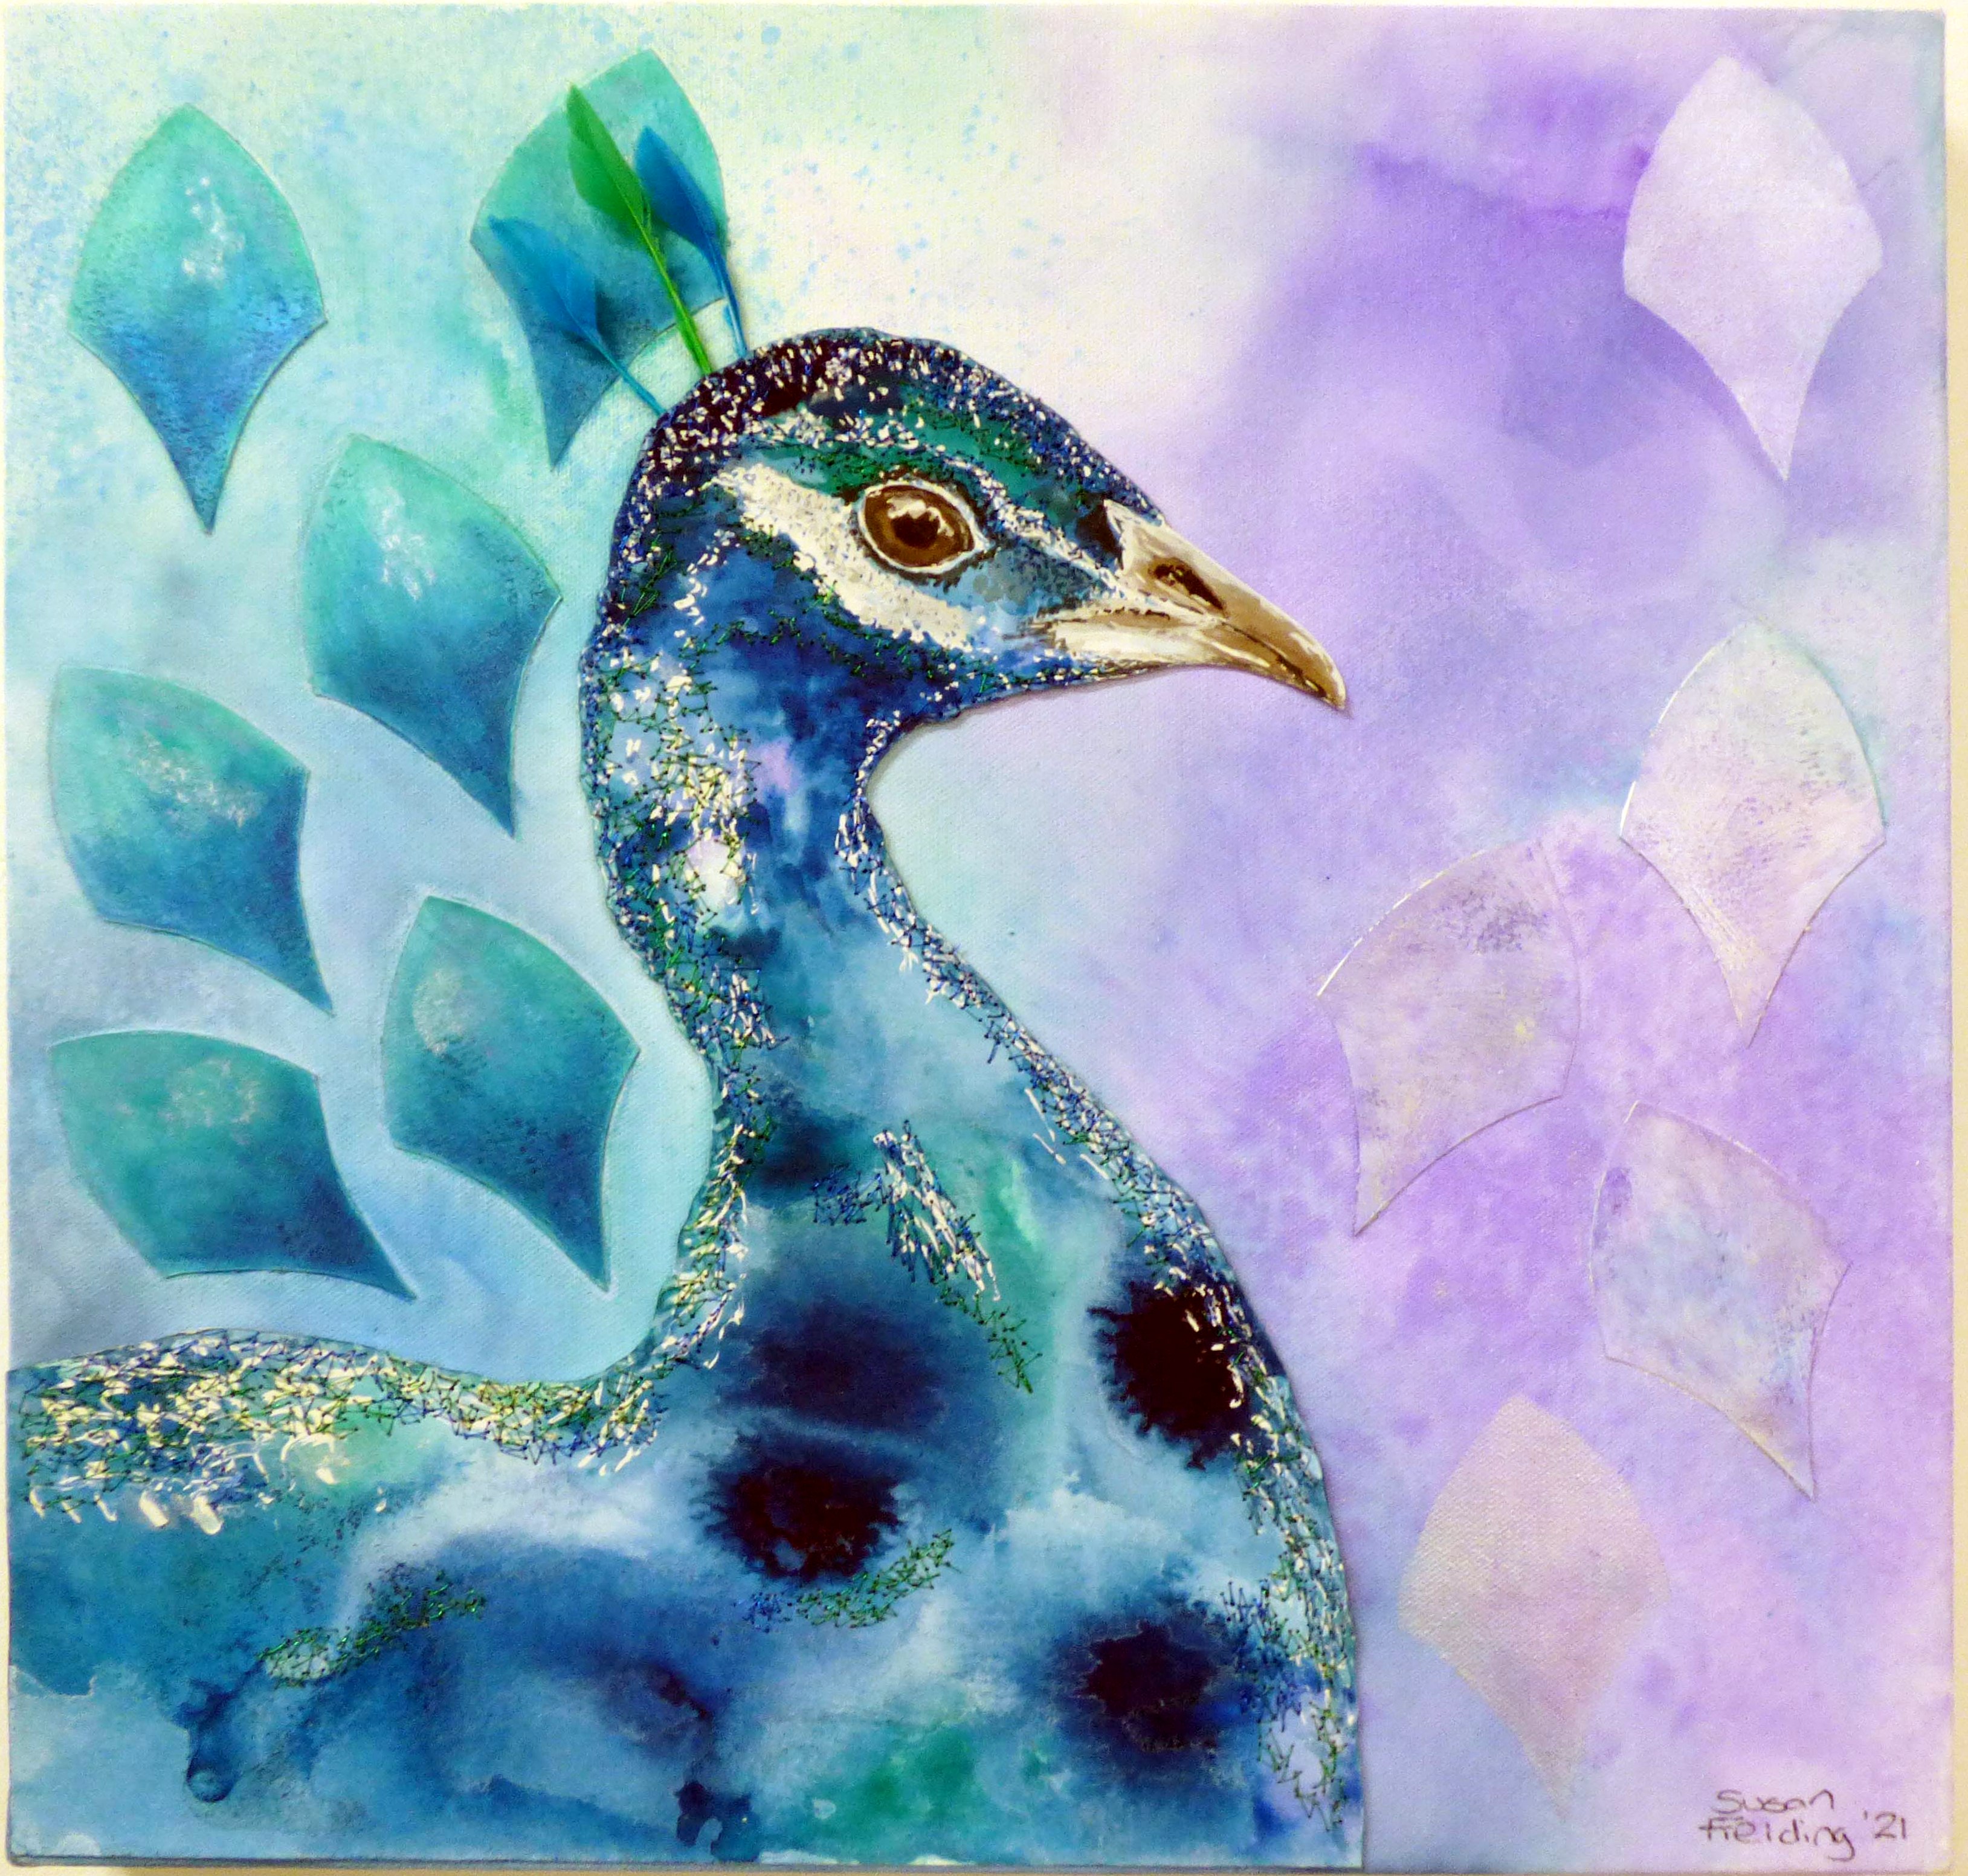 PEACOCK by Susan Fielding, Natural Progression Group, July 2021